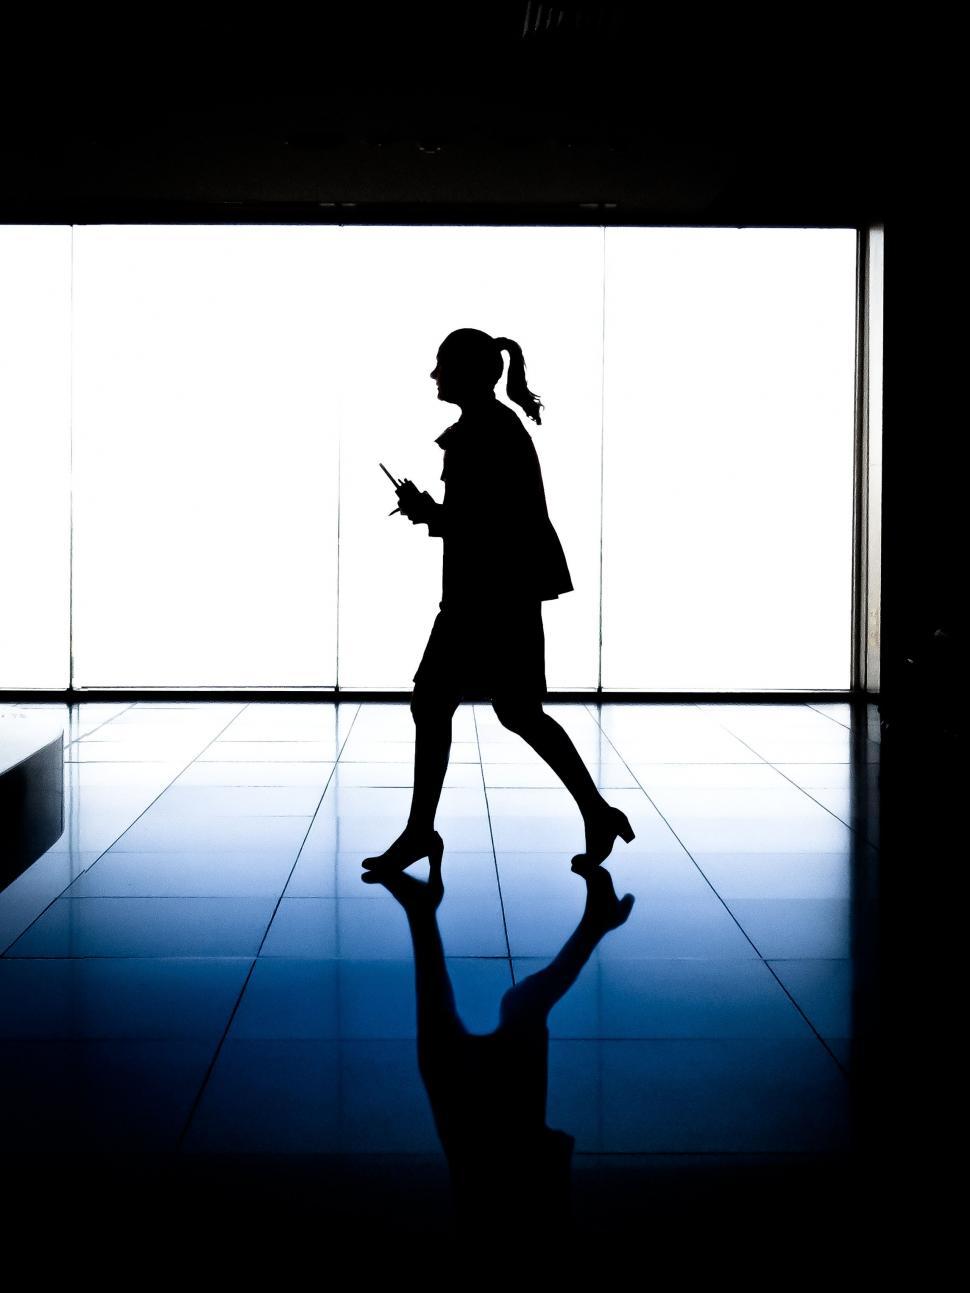 Free Image of Silhouette of Woman Walking Through Airport 